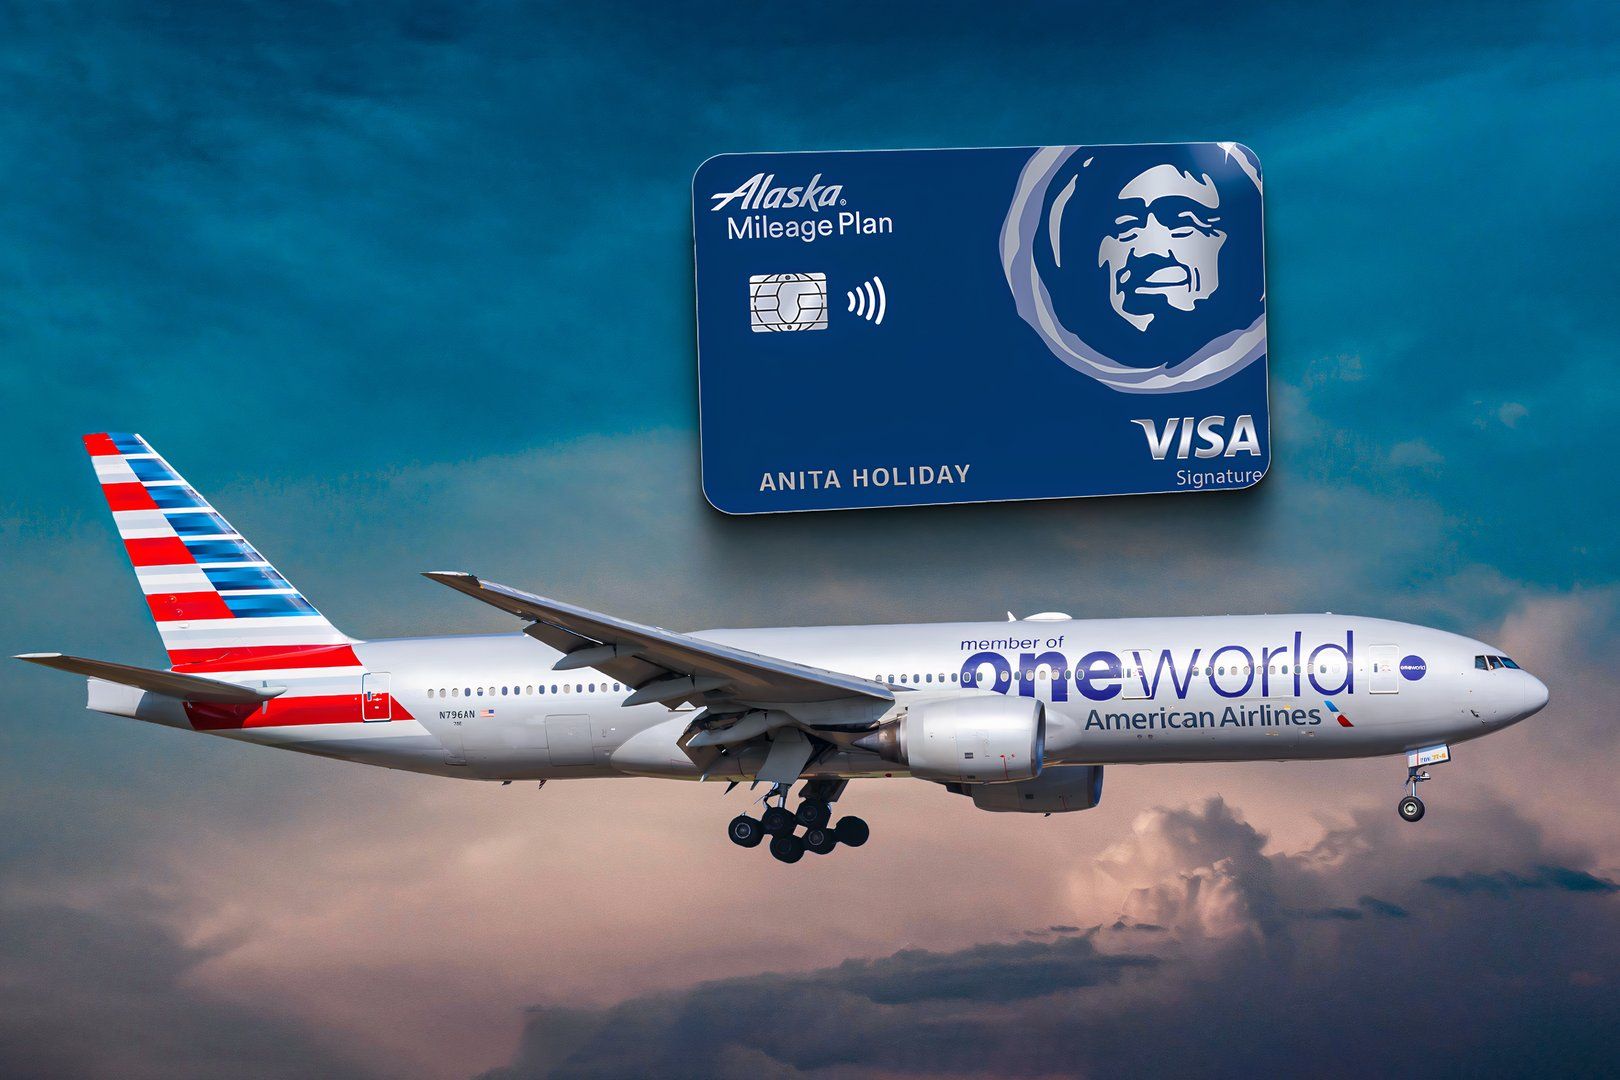 An American Airlines plane in oneworld livery underneath an Alaska Airlines credit card